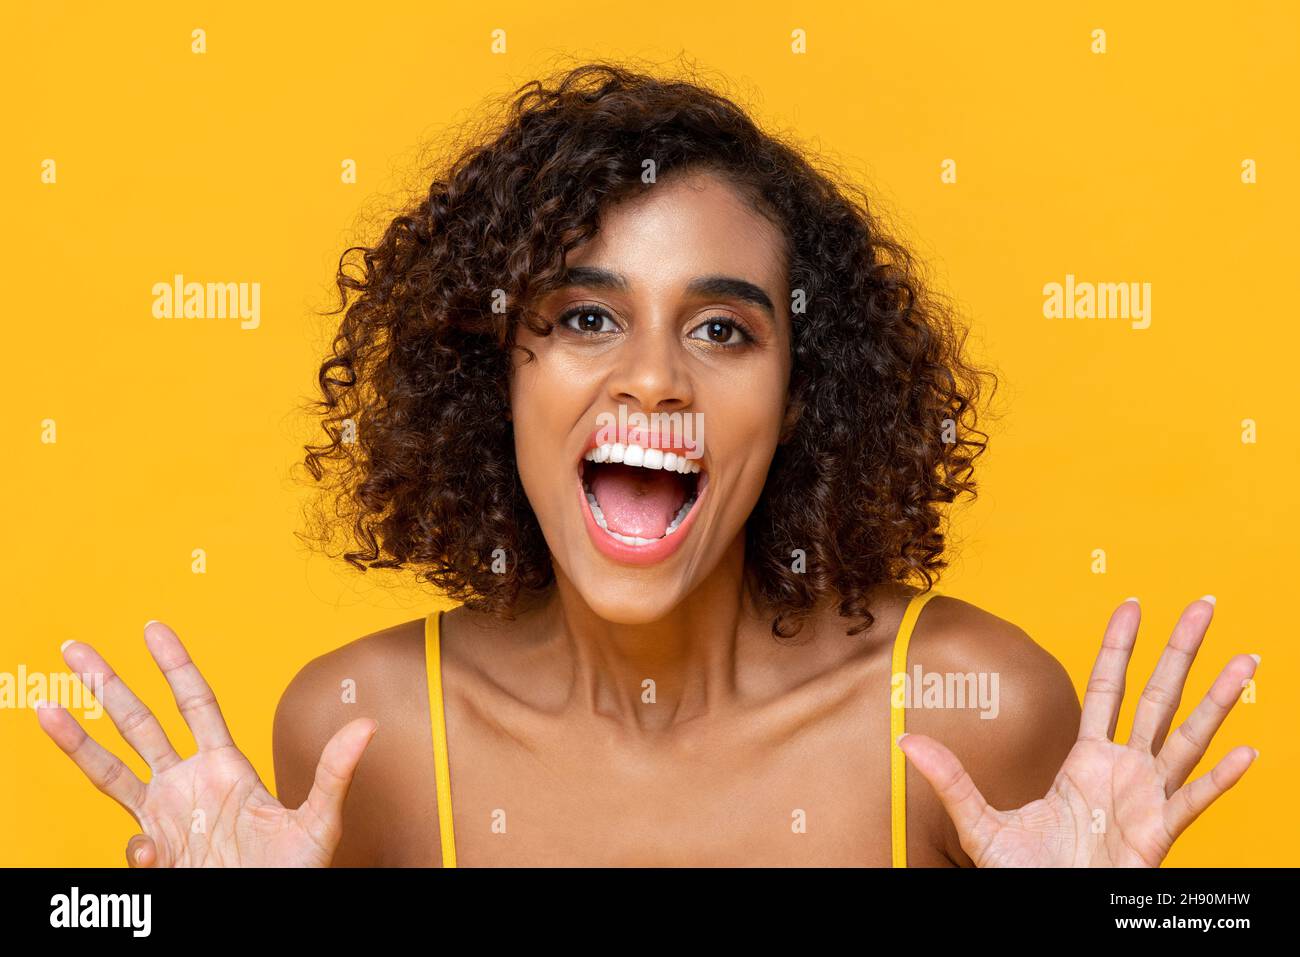 Happy smiling curly hair beautiful woman looking at camera with opsn mouth isolated on yellow background Stock Photo